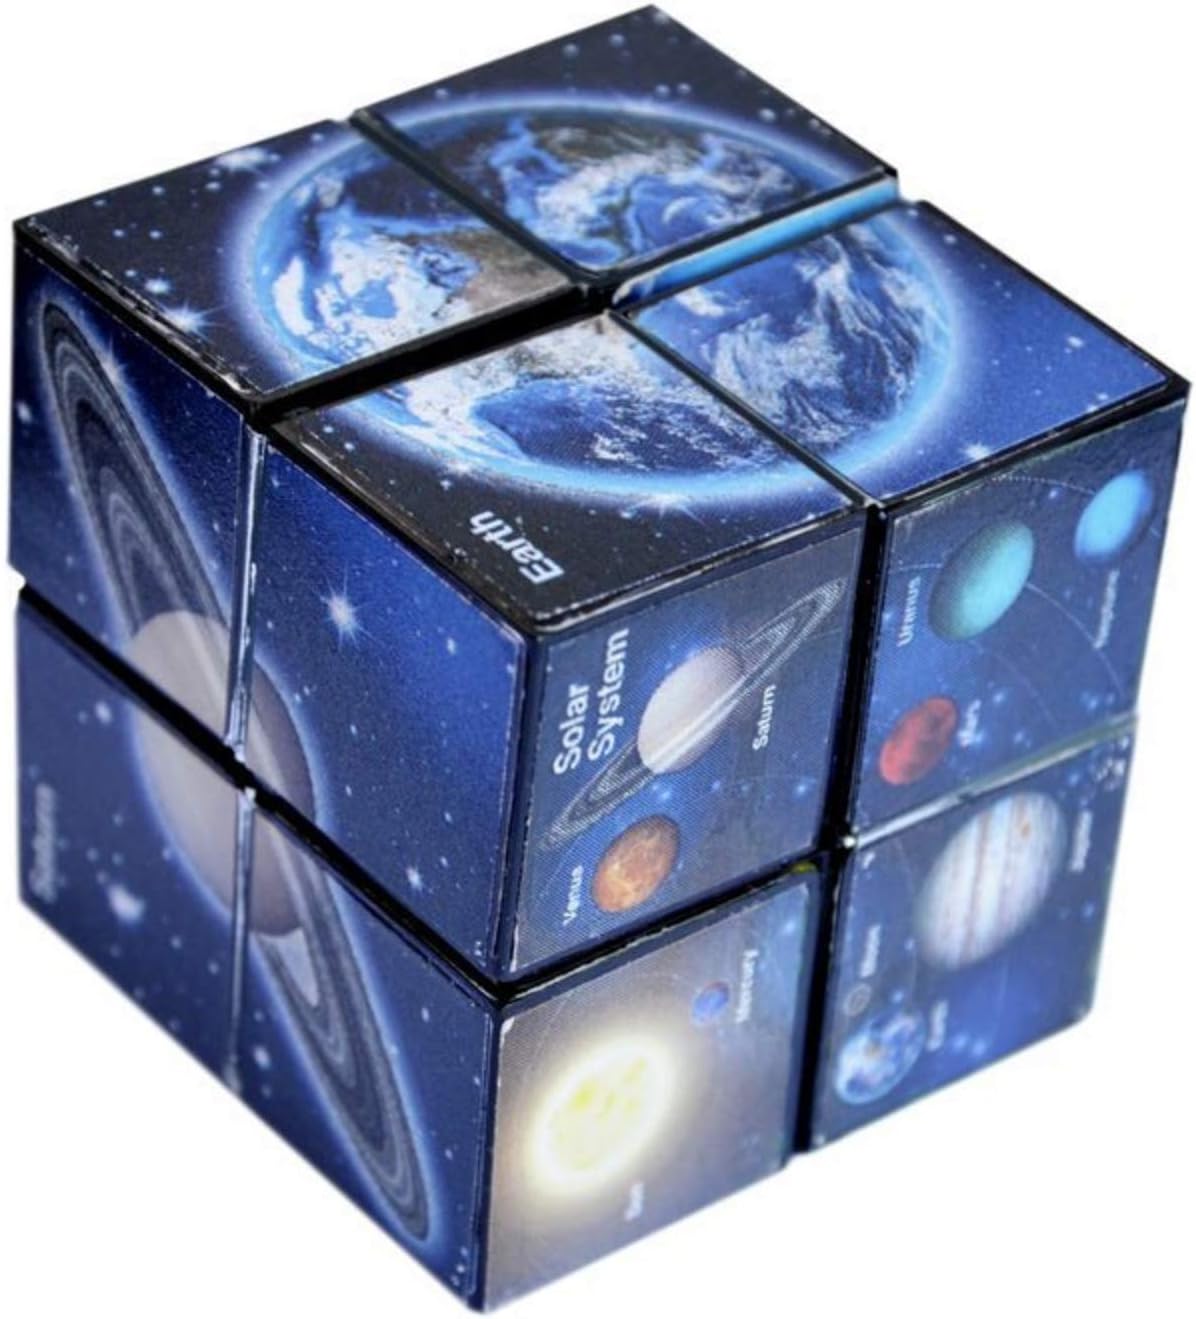 The Amazing Star Cube - Cosmos